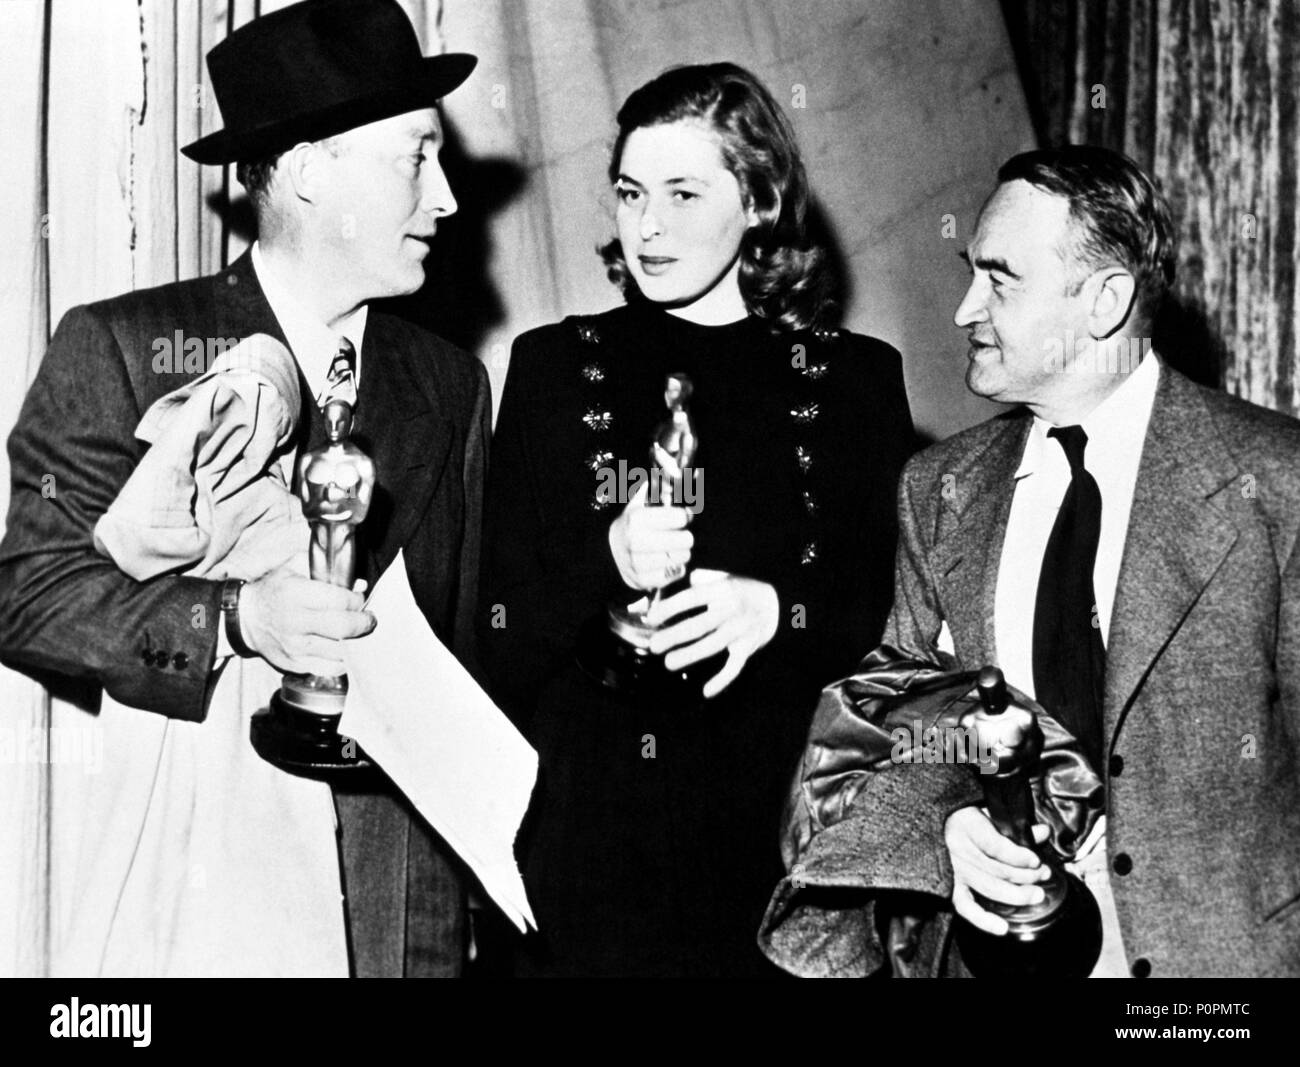 Description: The 17th Academy Awards / 1945.   Barry Fitzgerald, best actor in a supporting role for 'Going my way'. Ingrid Bergman, best actress for 'Gaslight'. Bing Crosby, best actor for 'The Bells of St. Mary´s'..  Year: 1945.  Stars: INGRID BERGMAN; BARRY FITZGERALD; BING CROSBY. Stock Photo